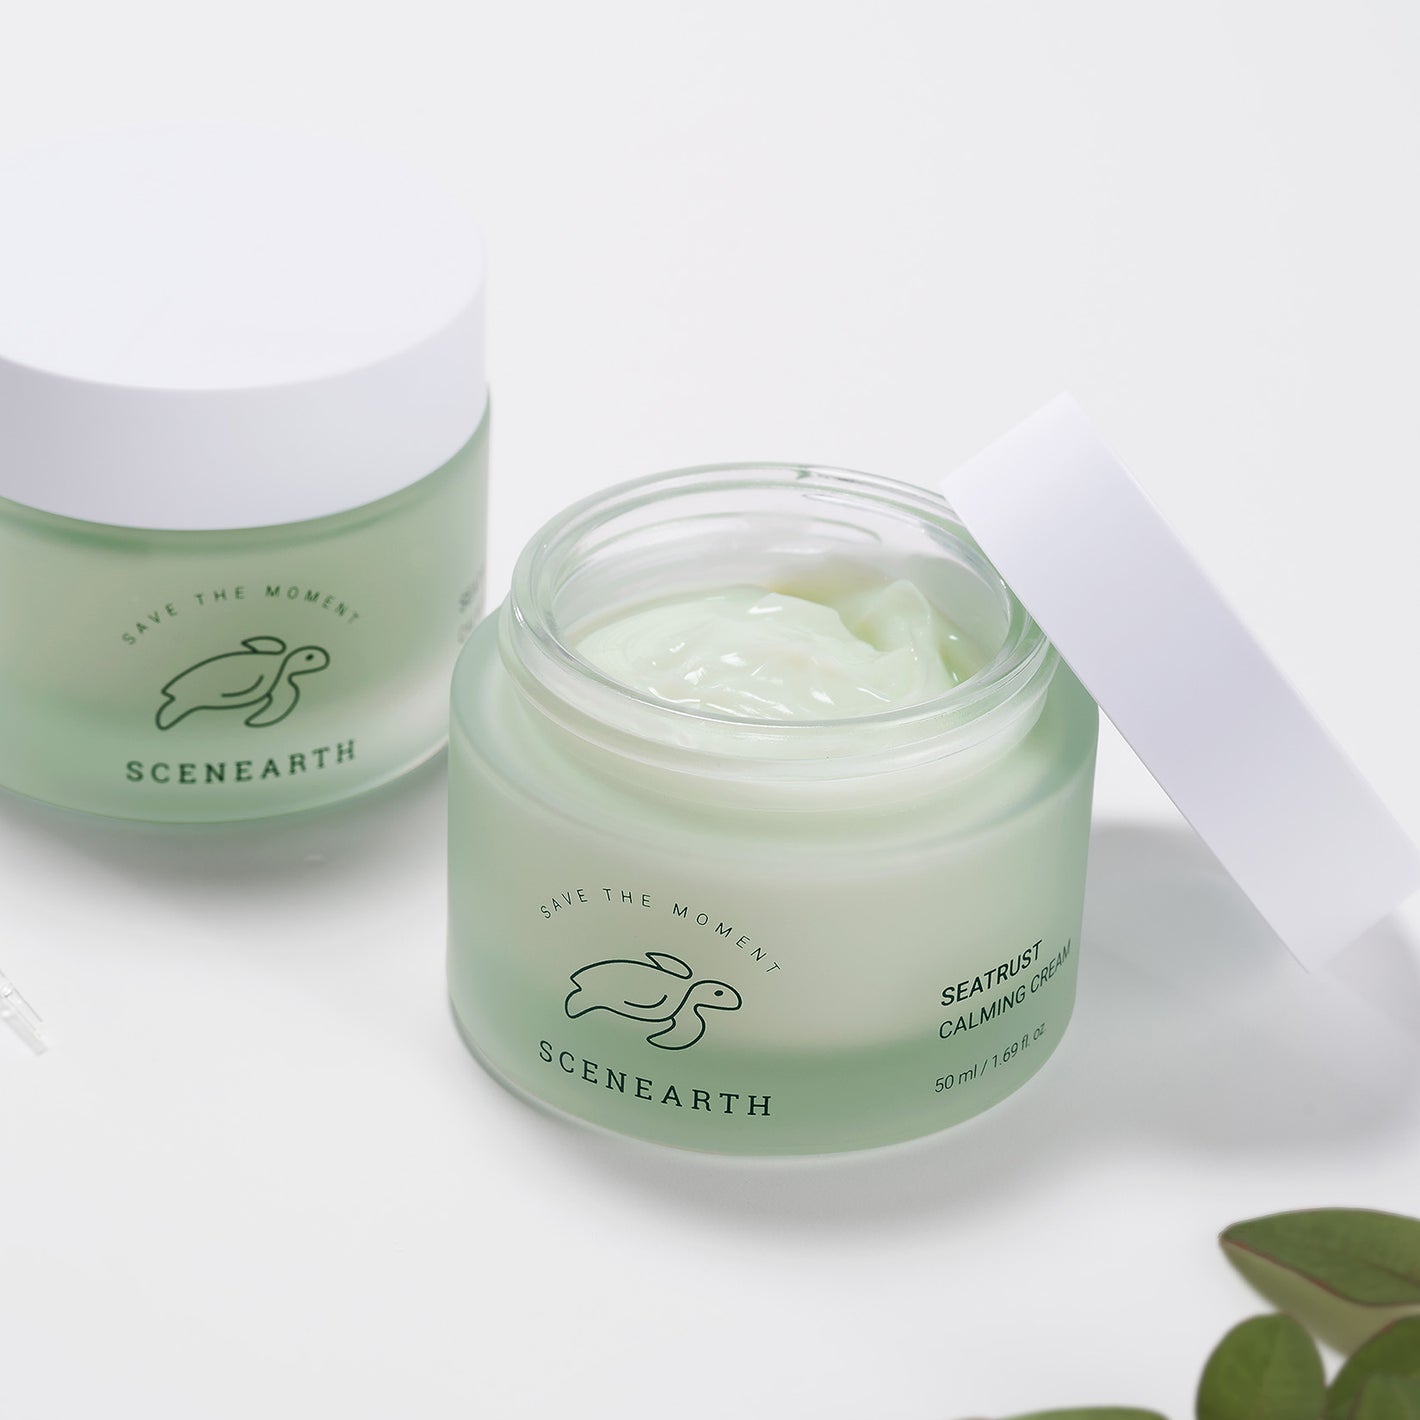 Two Scenearth Seatrust Calming Cream products next to some leafs in the lower right corner and in front of a white background